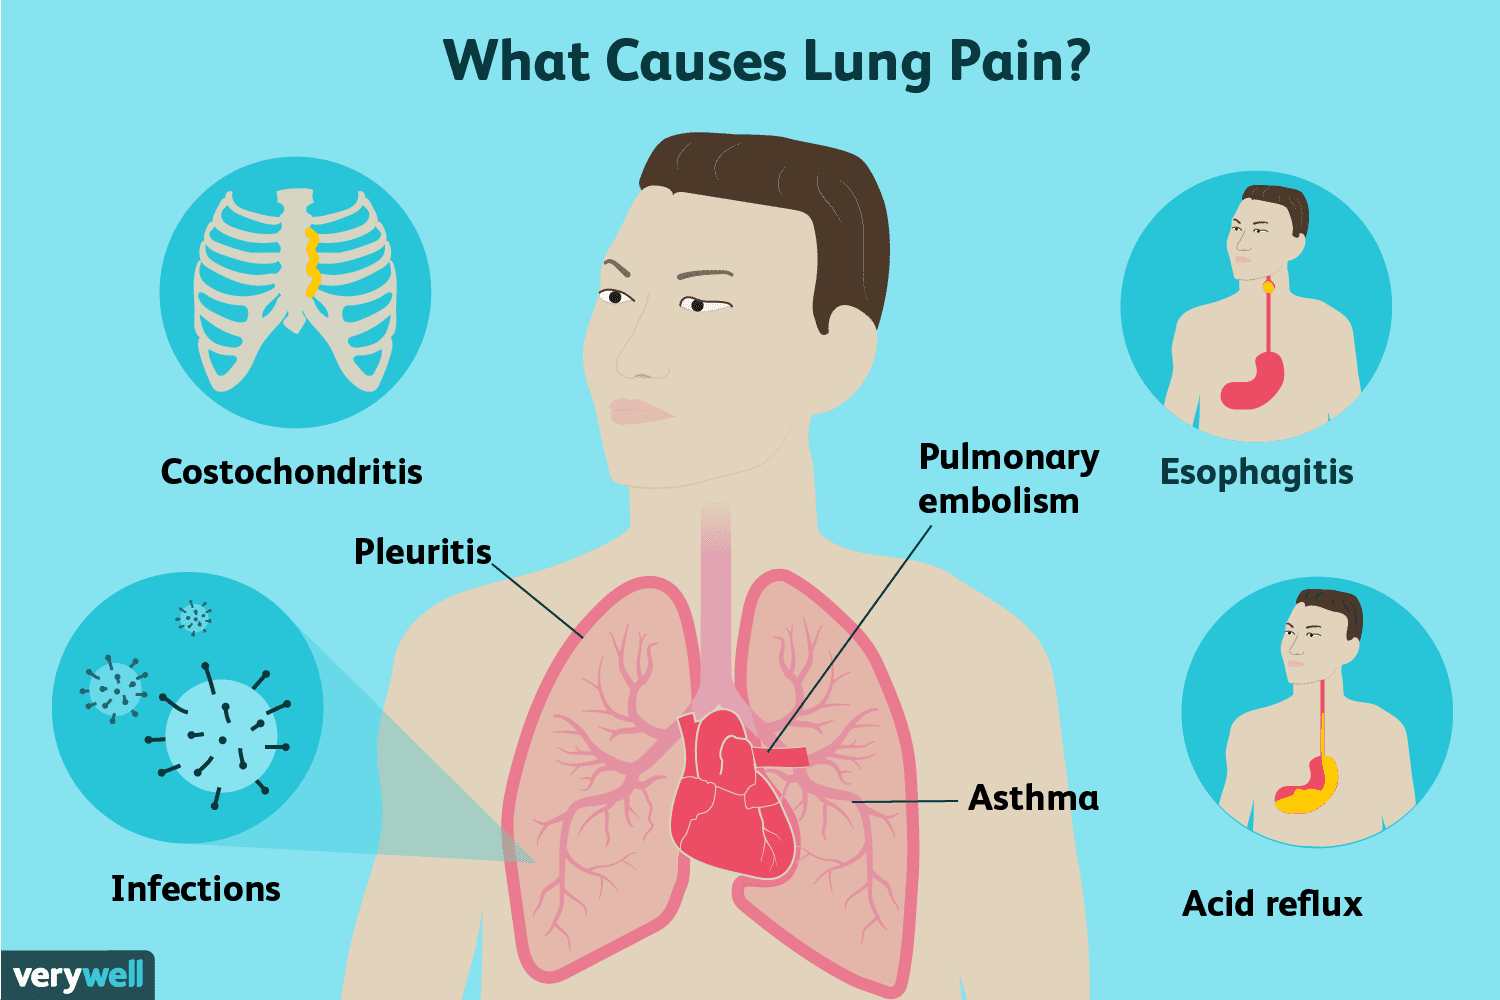 Lung Pain: Causes, Treatment, and When to See a Doctor